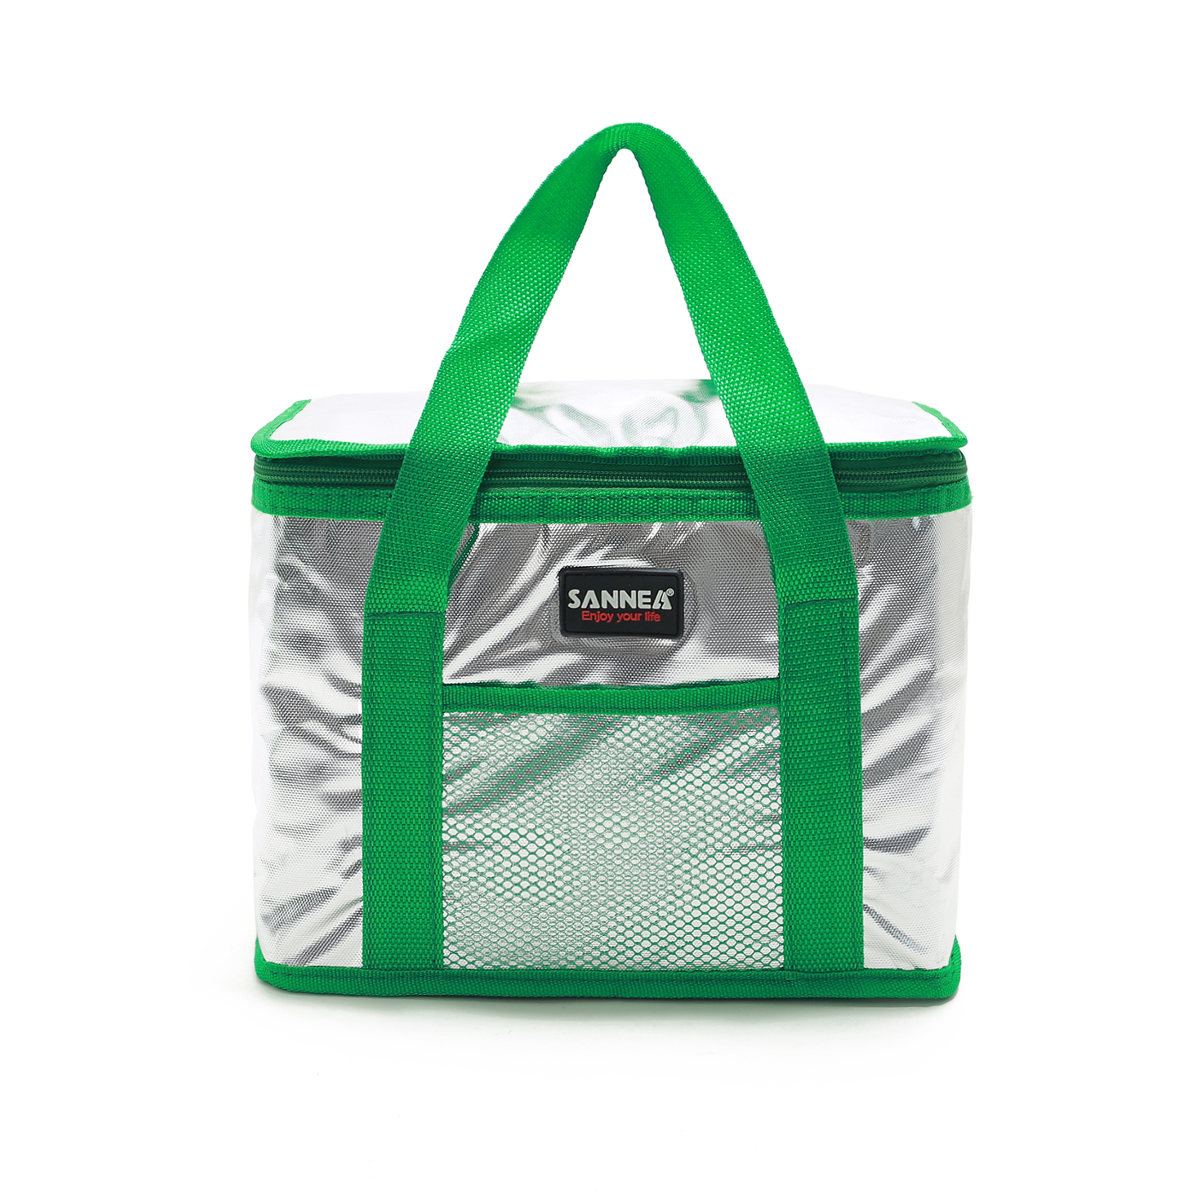 81626L-Picnic-Bag-Food-Delivery-Insulated-Bag-Lunch-Box-Storage-Bag-Outdoor-Camping-Travel-1855998-8